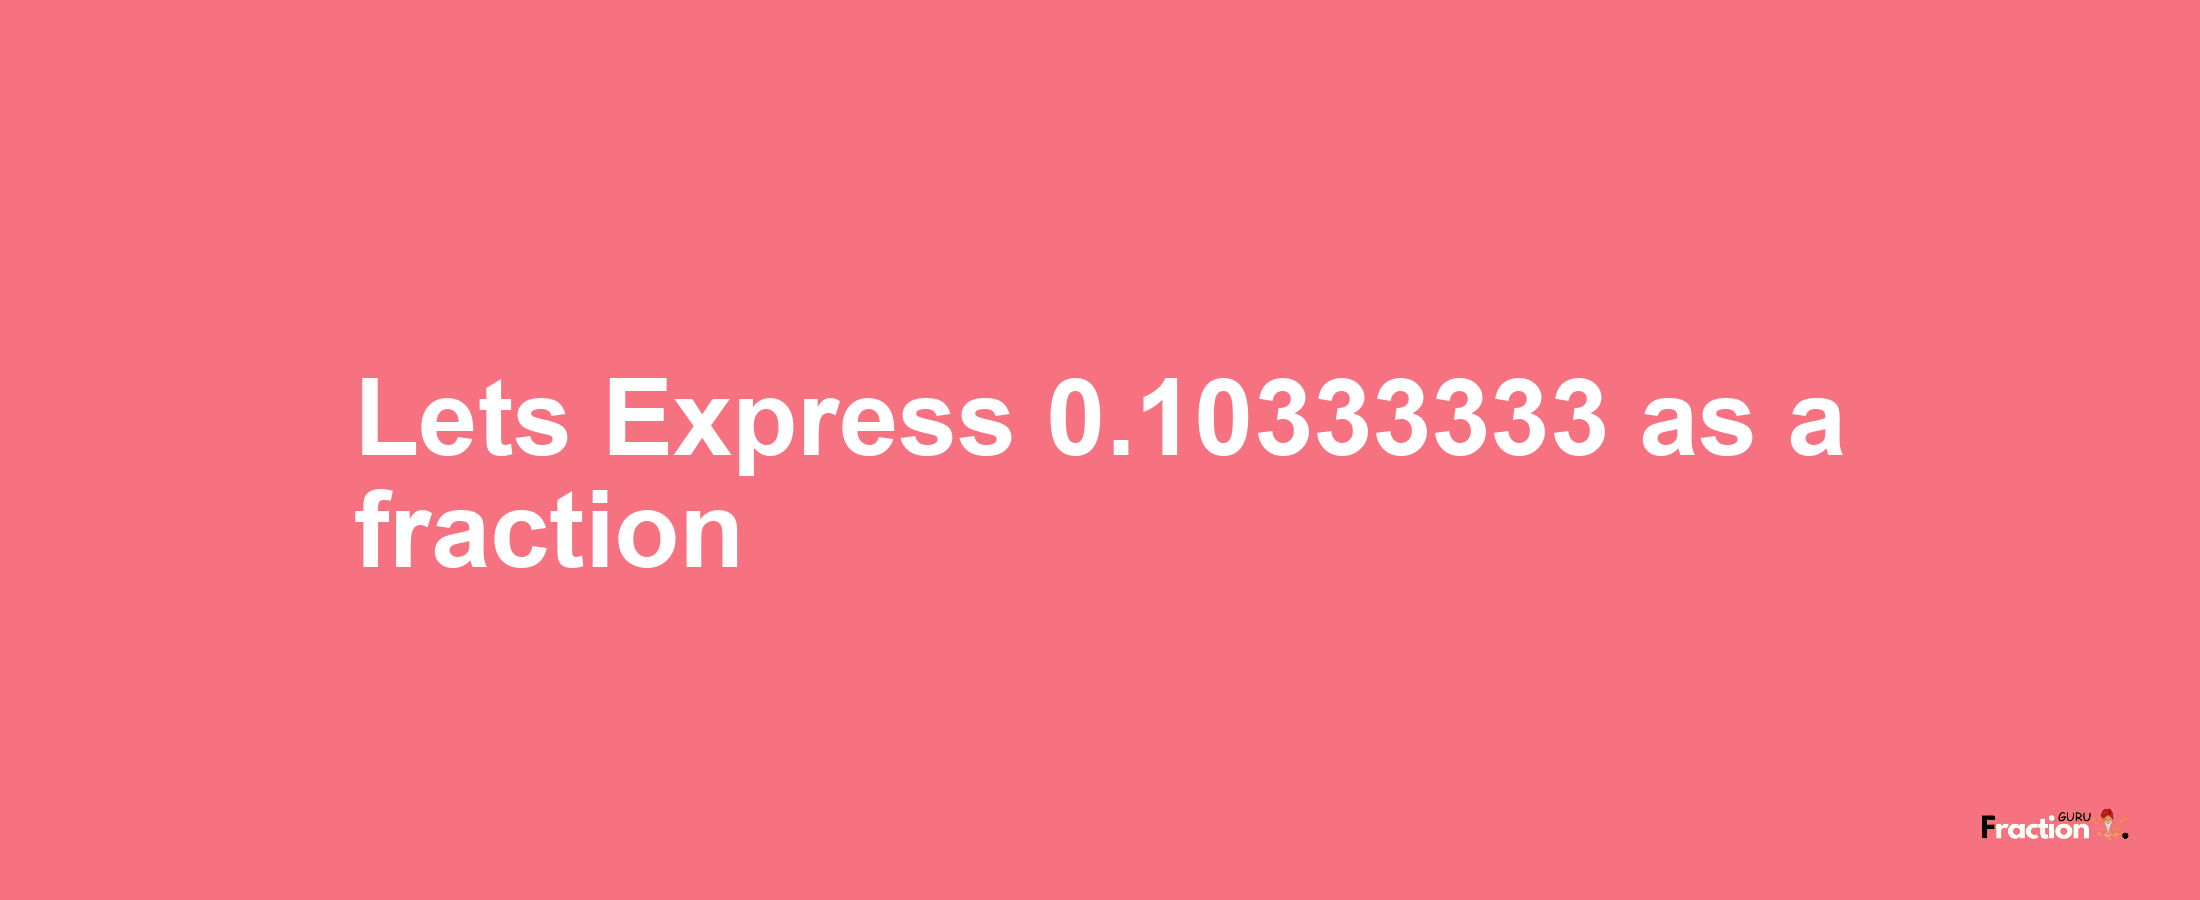 Lets Express 0.10333333 as afraction